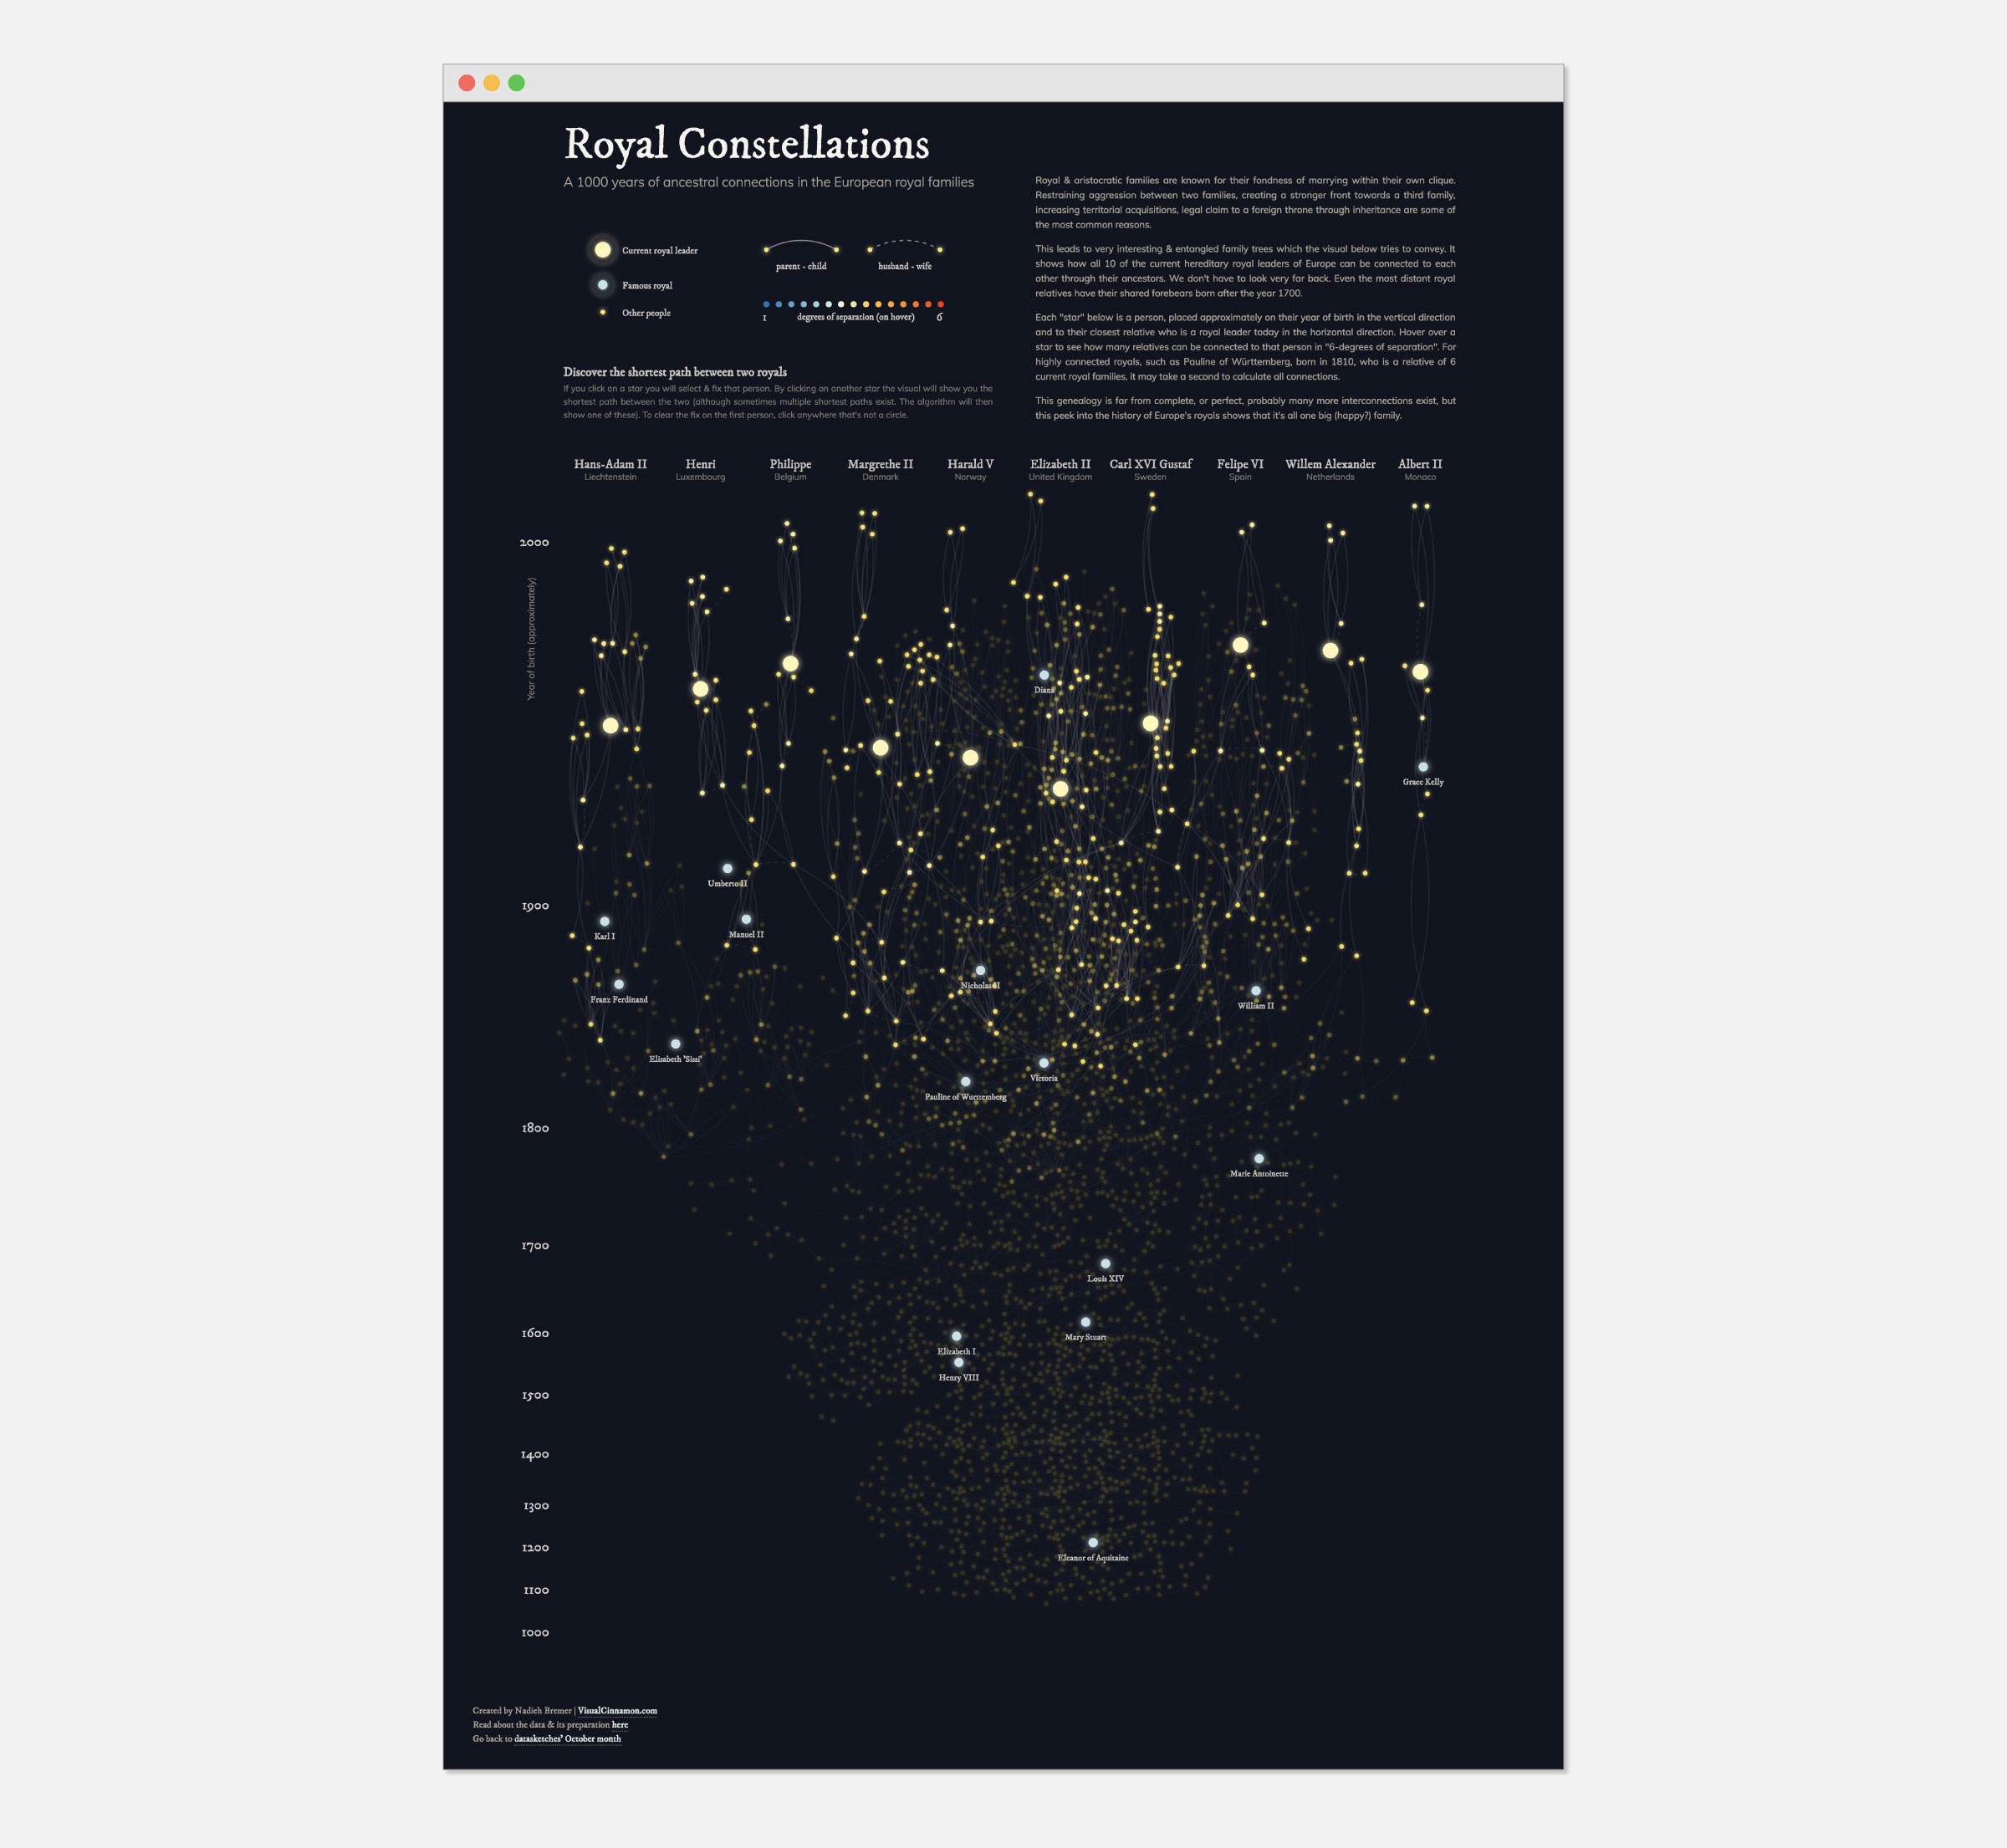 The complete image of Royal Constellations